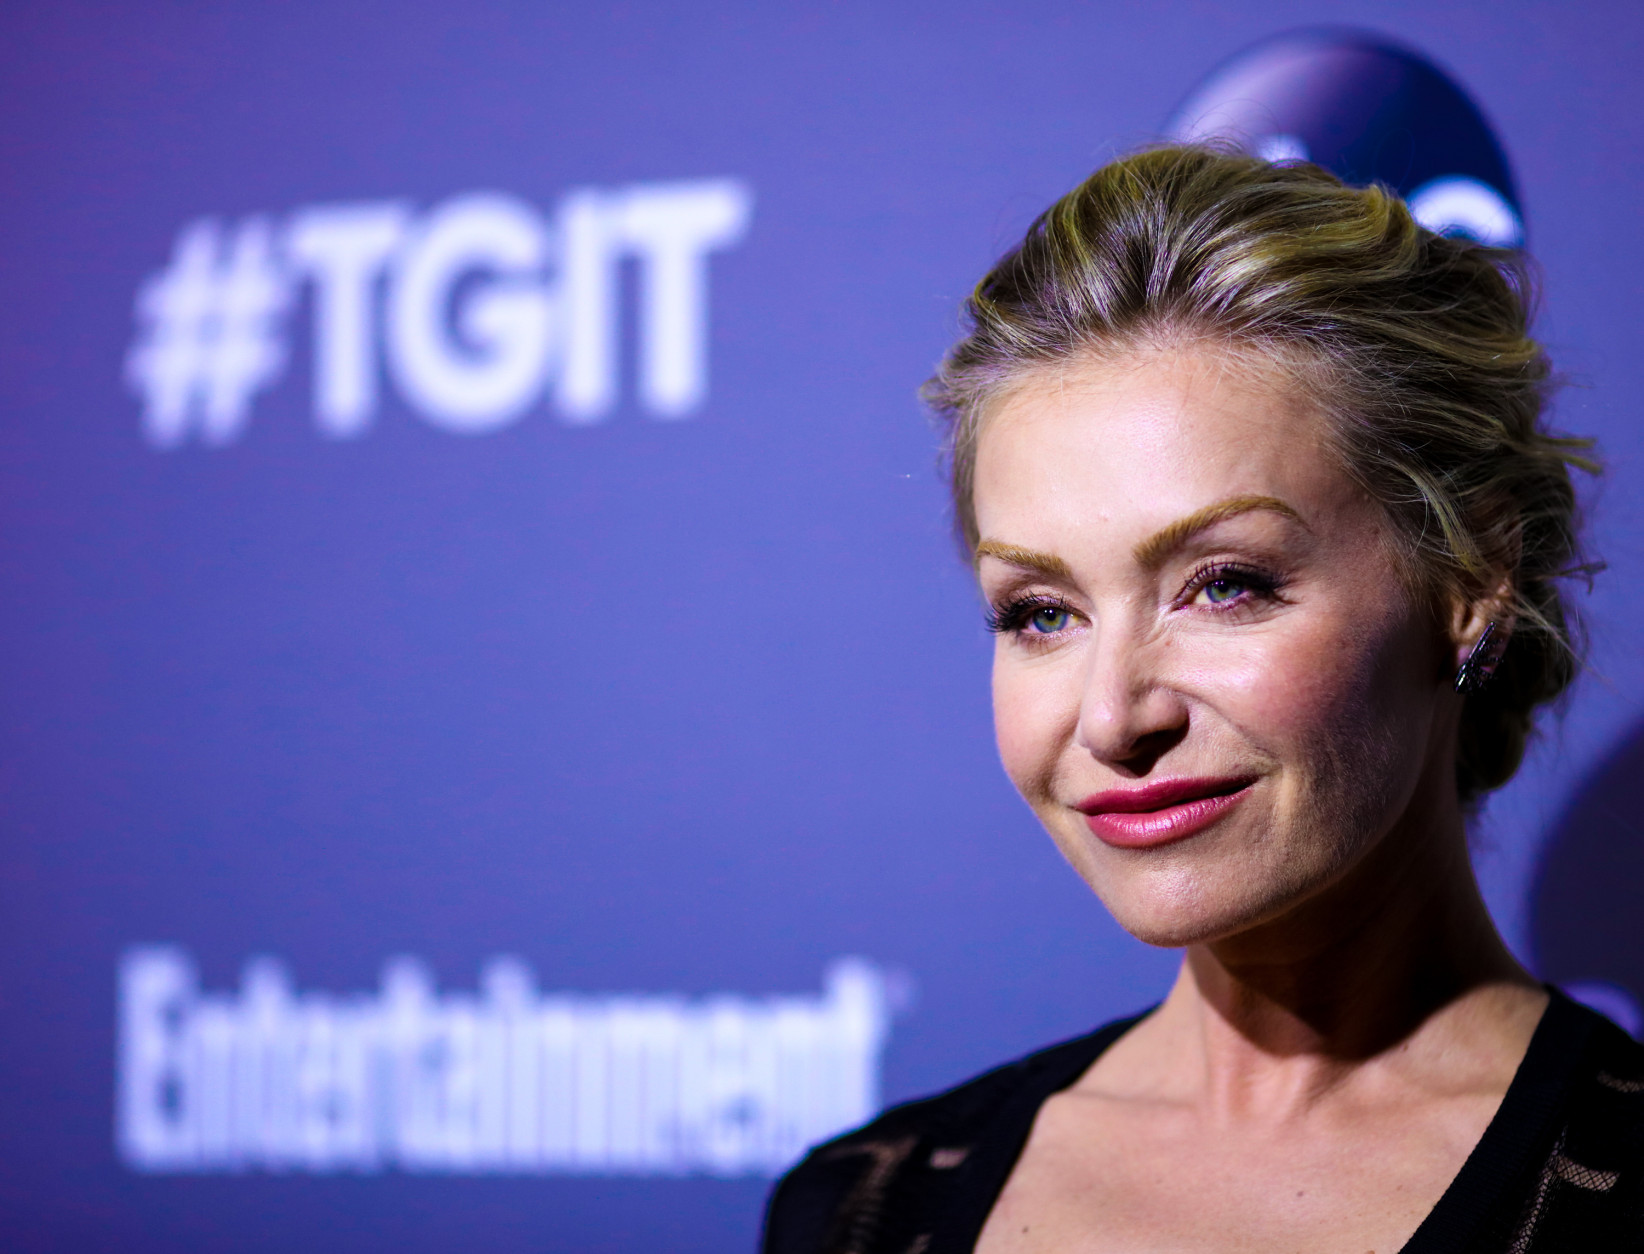 WEST HOLLYWOOD, CA - SEPTEMBER 26:  Actress Portia de Rossi attends the celebration of ABC's TGIT Line-up held at Gracias Madre on September 26, 2015 in West Hollywood, California.  (Photo by Mark Davis/Getty Images)